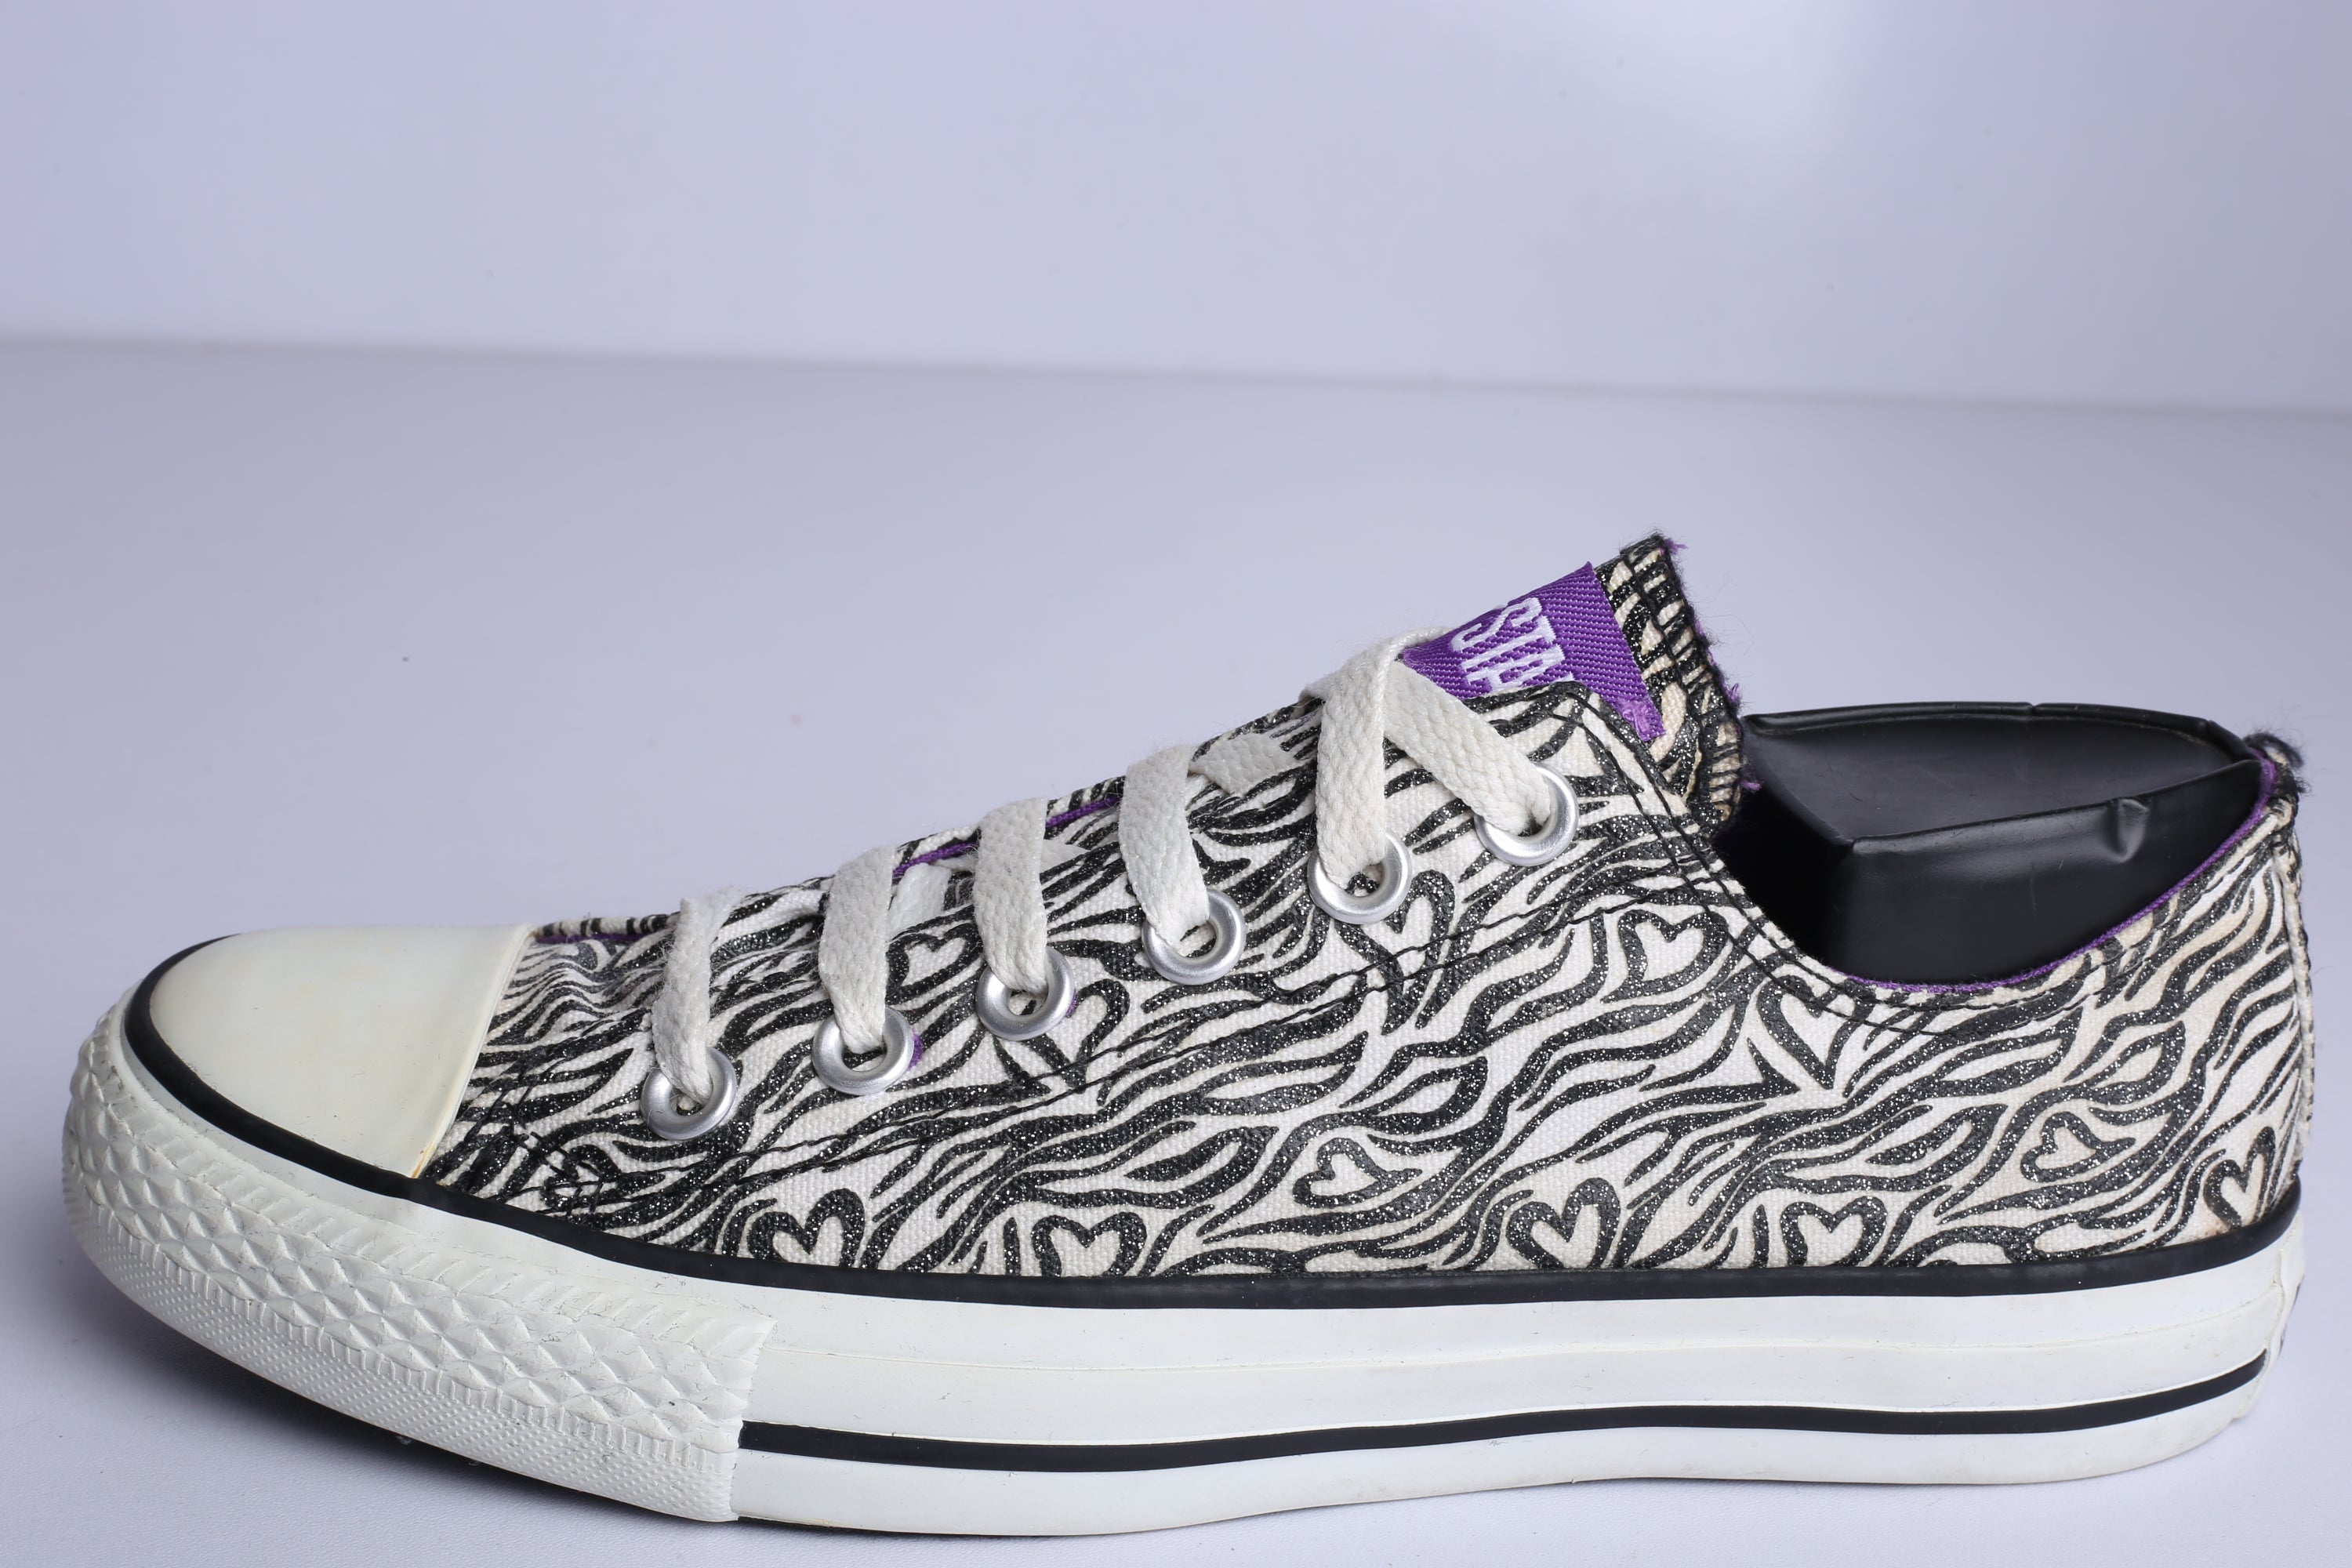 Chuck Taylor All Star Low Grey Printed Sneaker - (Condition Premium)